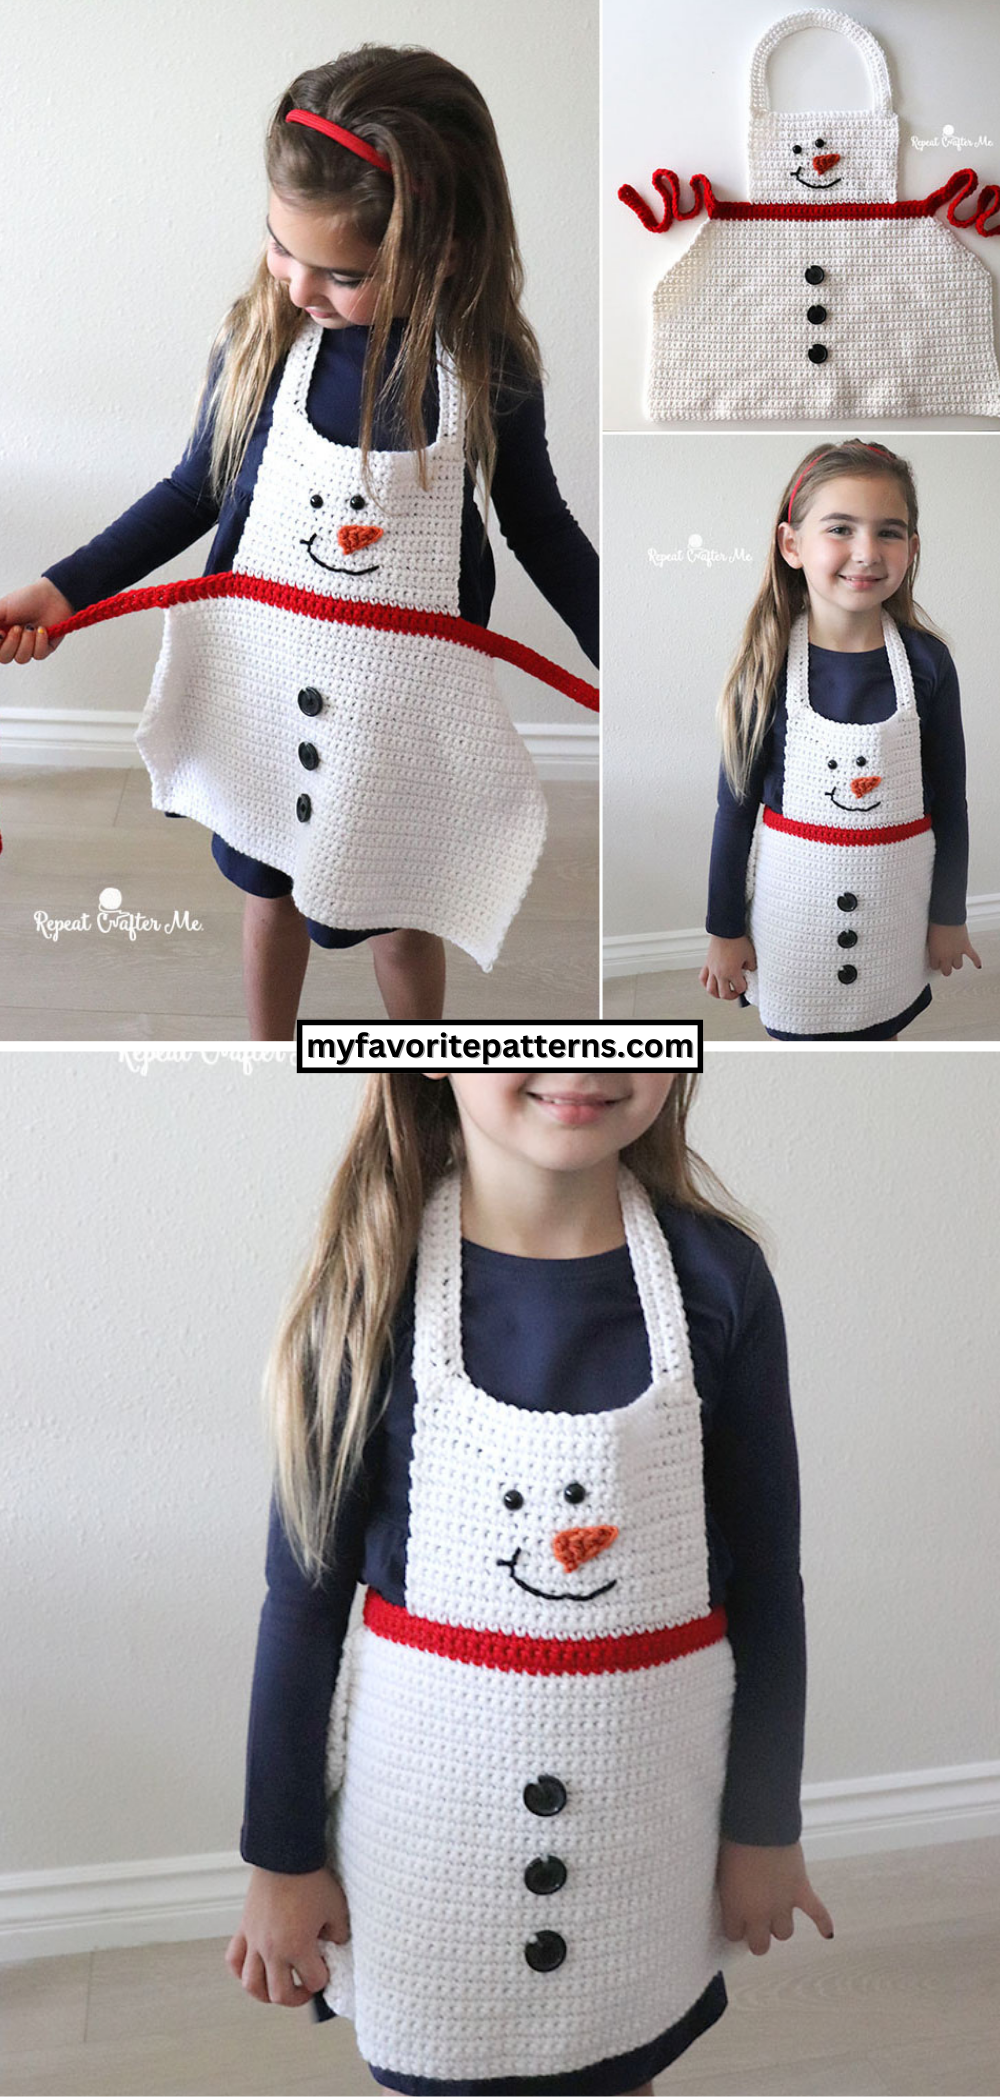 Ravelry: Mommy and Me Apron pattern by Lindsey Dale